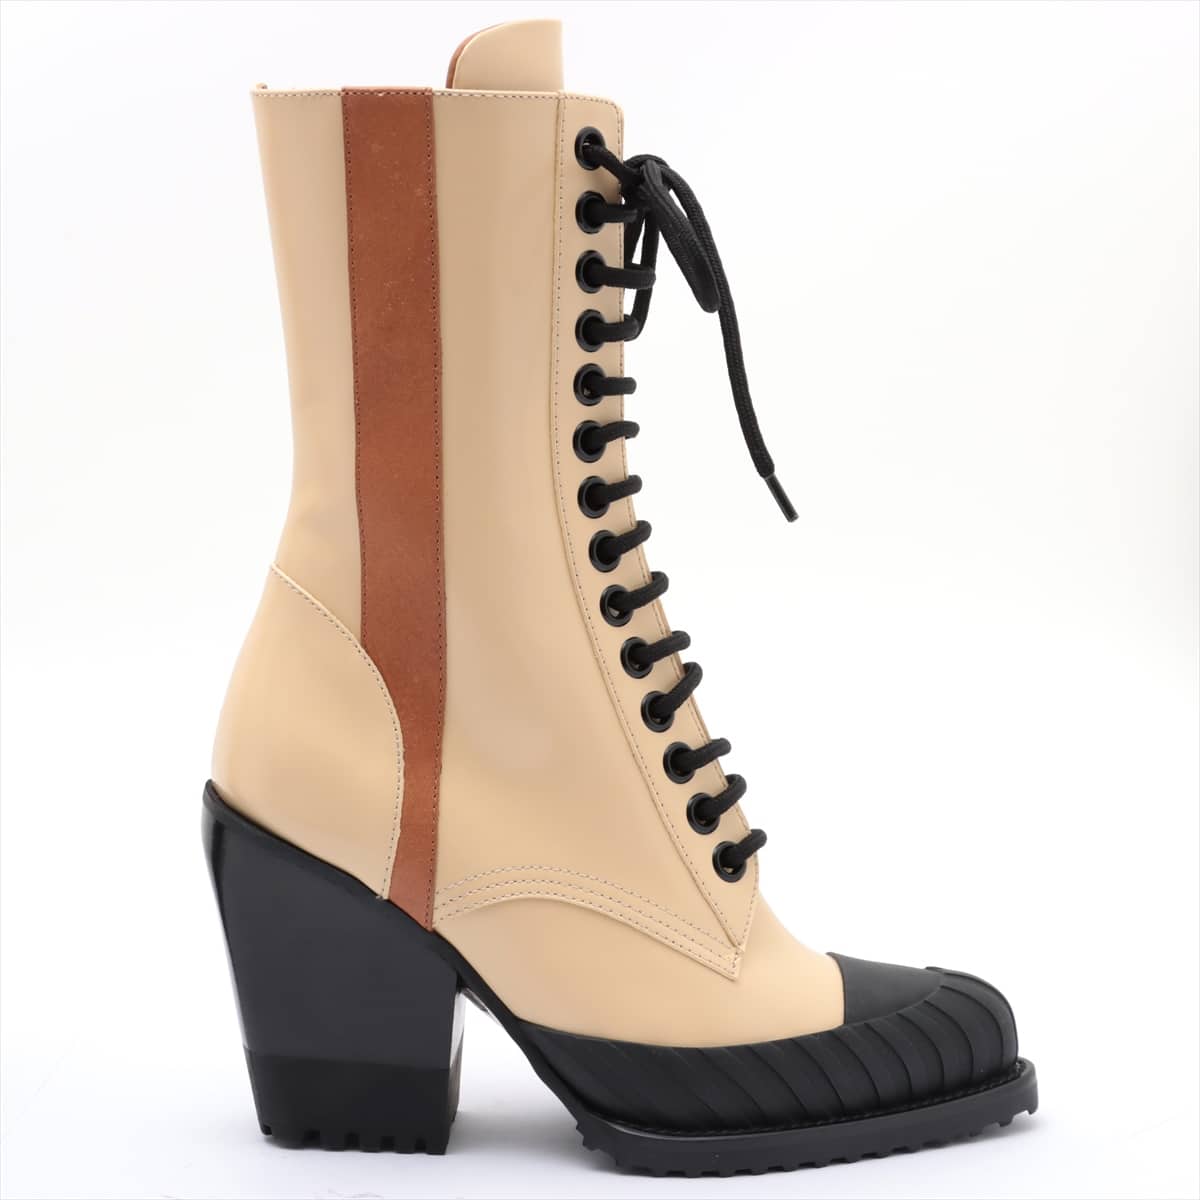 Chloe Leather Boots 37 Ladies' Yellow